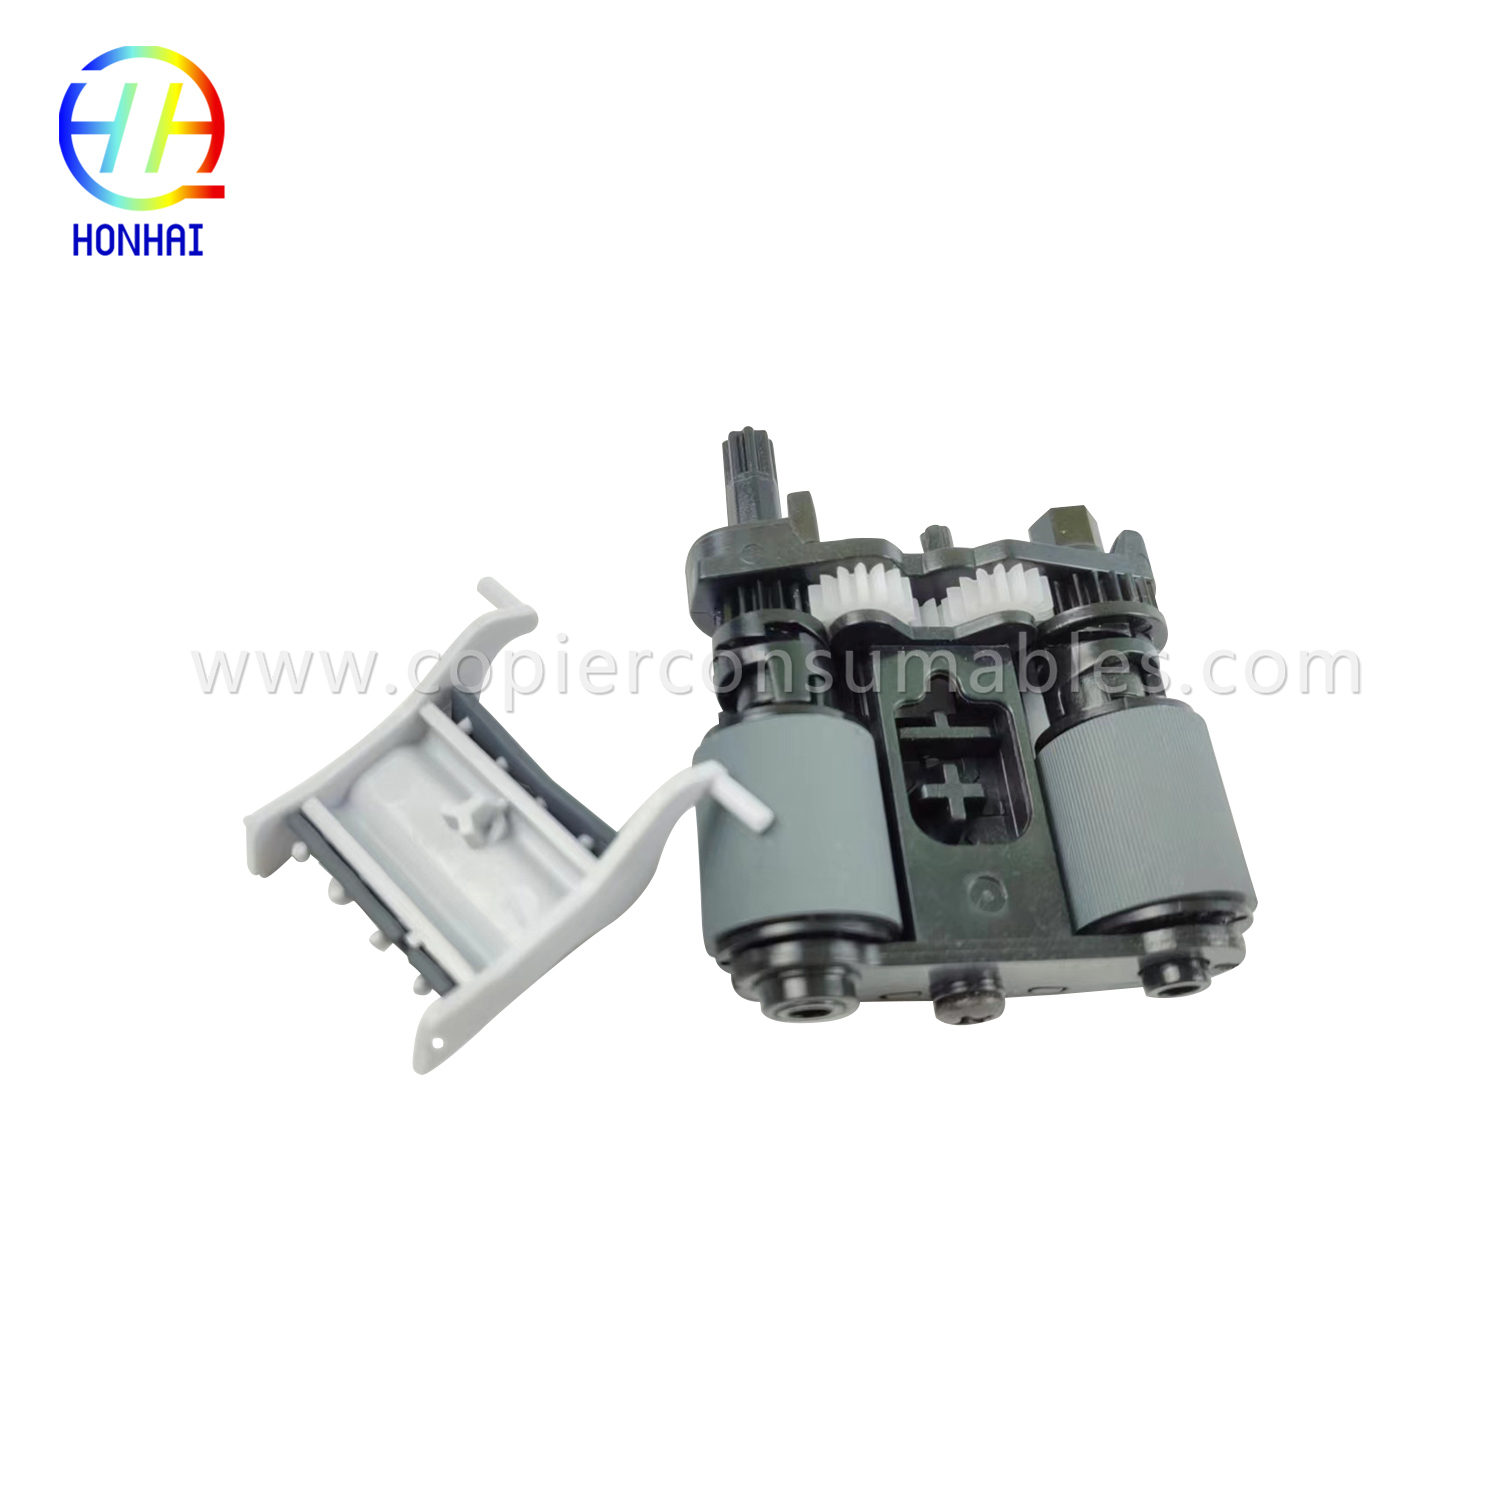 I-ADF Pickup Roller Assembly ye-HP Color LaserJet Pro MFP M281fdw M377dw M477fdn M477fdw M477fnw M426fdn M426fdw B3Q10-60105 (2)